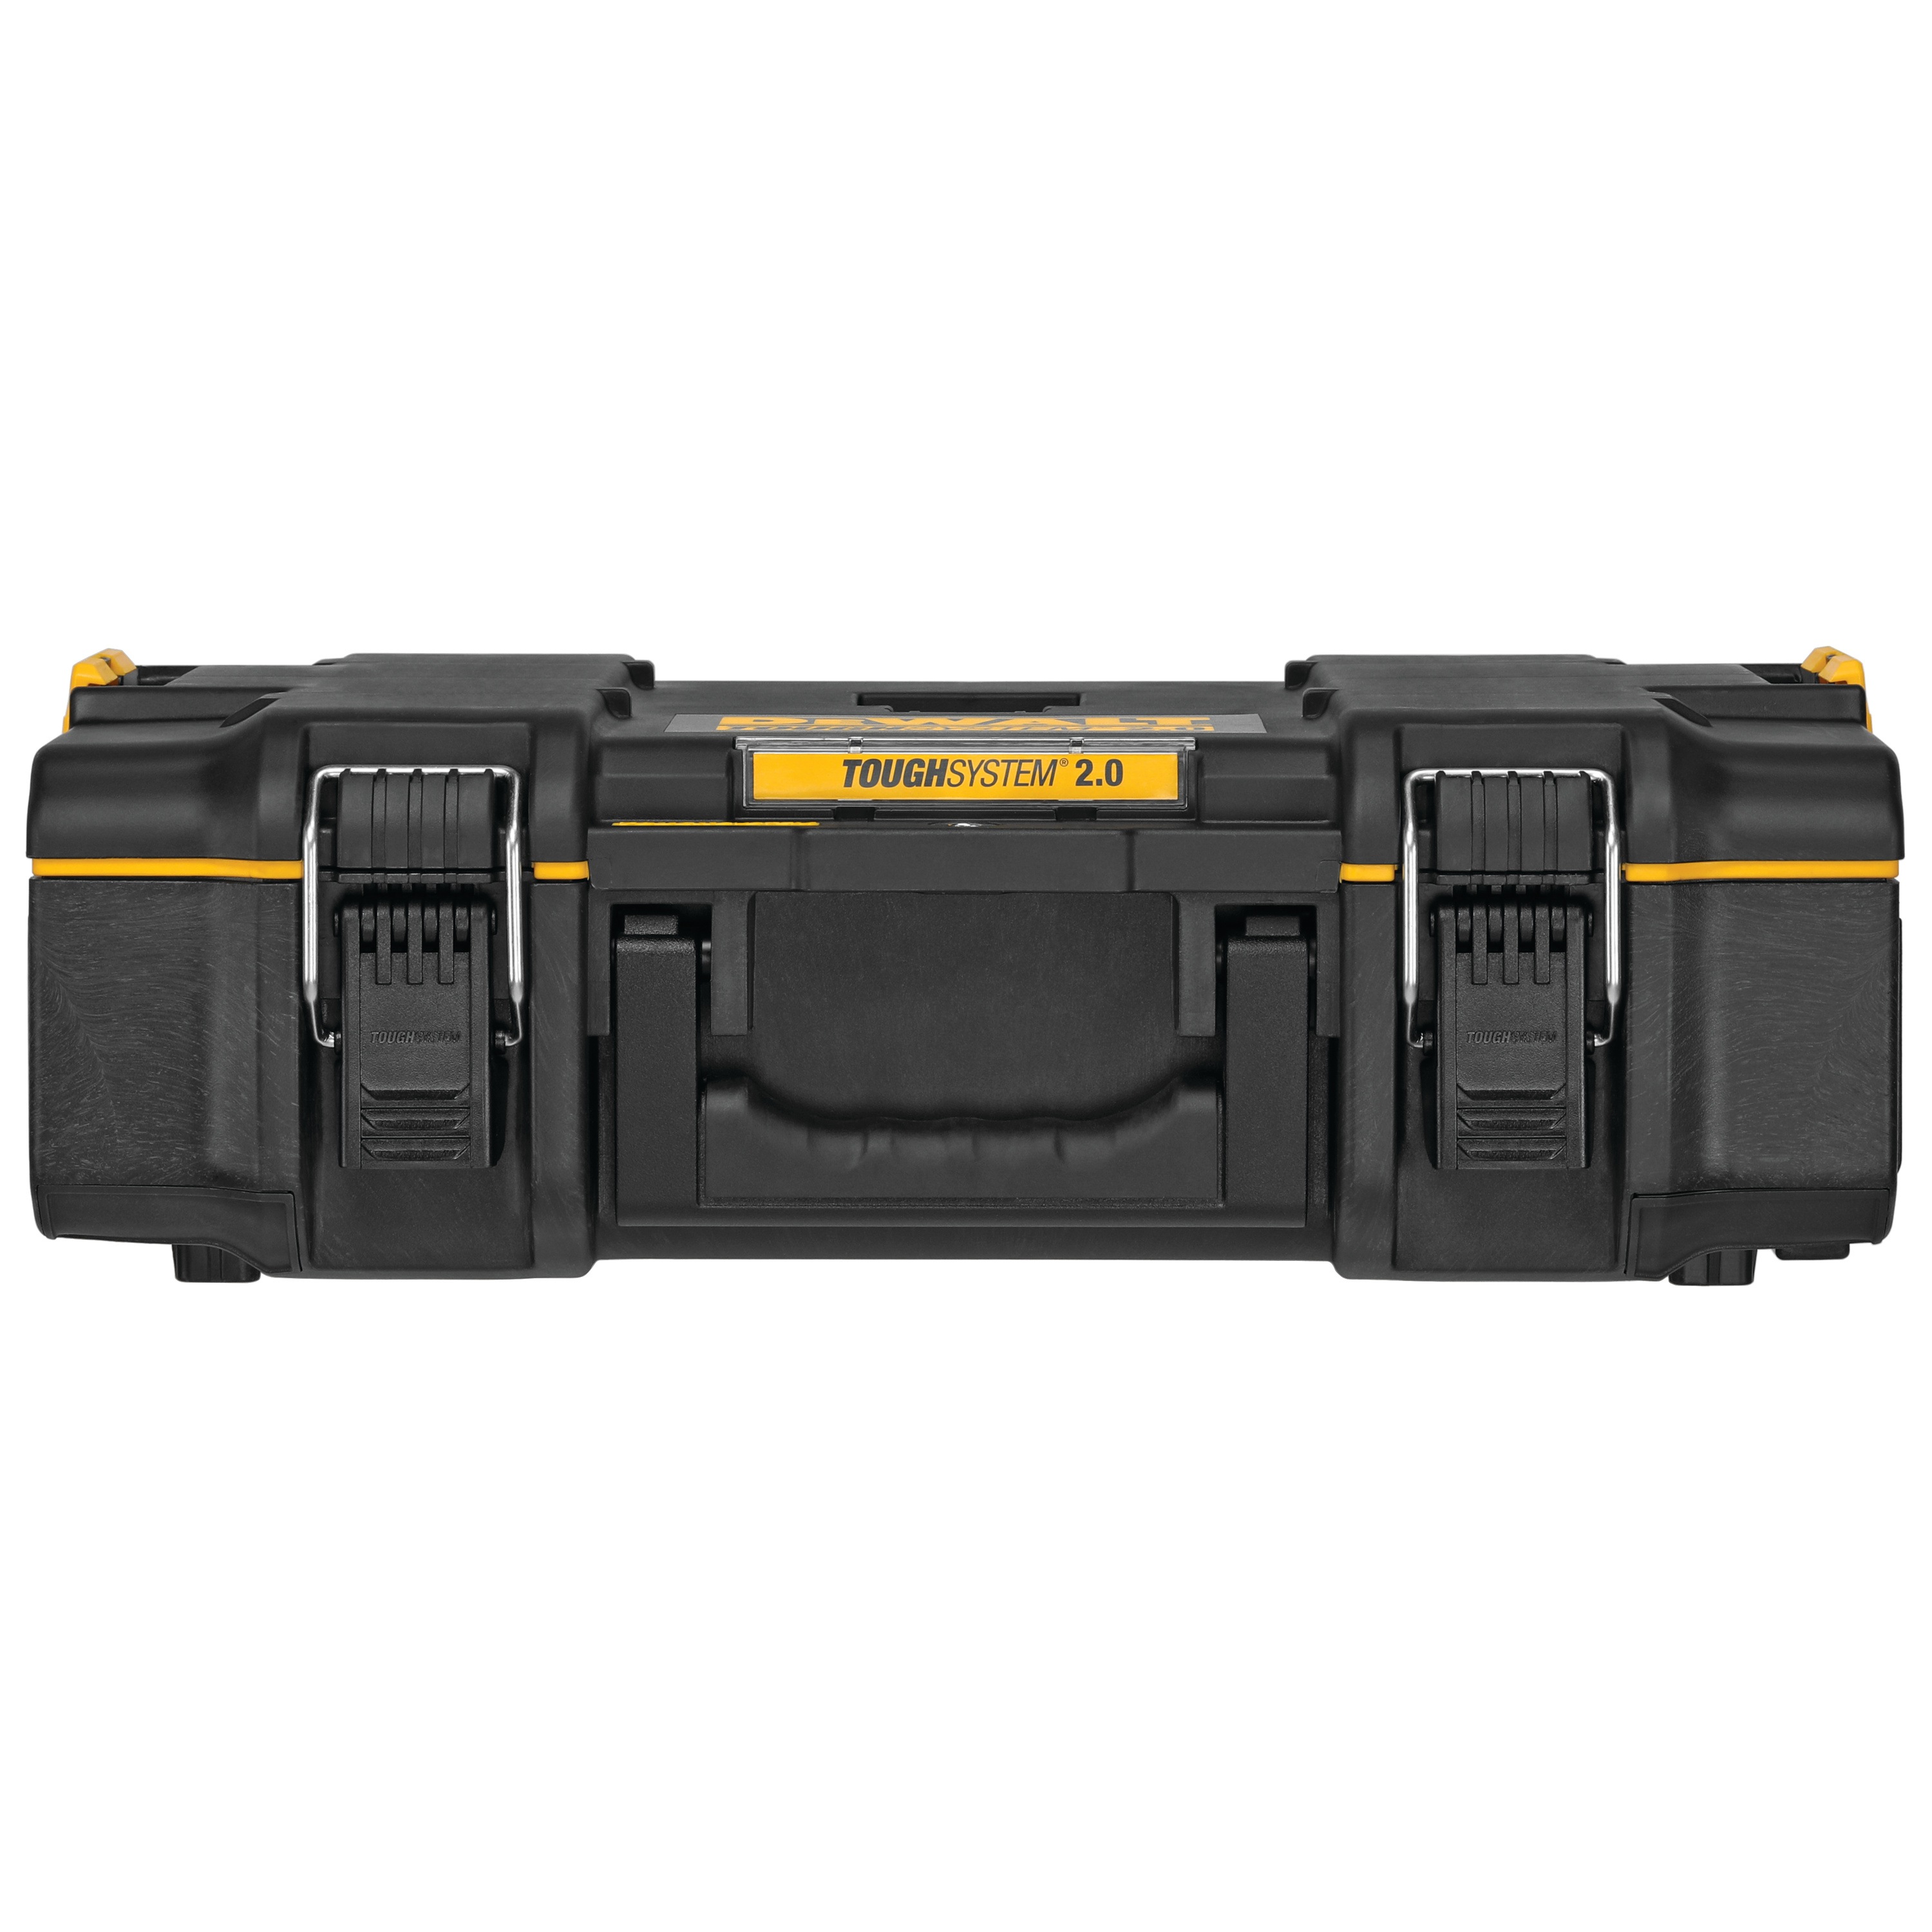 Front profile of tough system 2.0 toolbox.